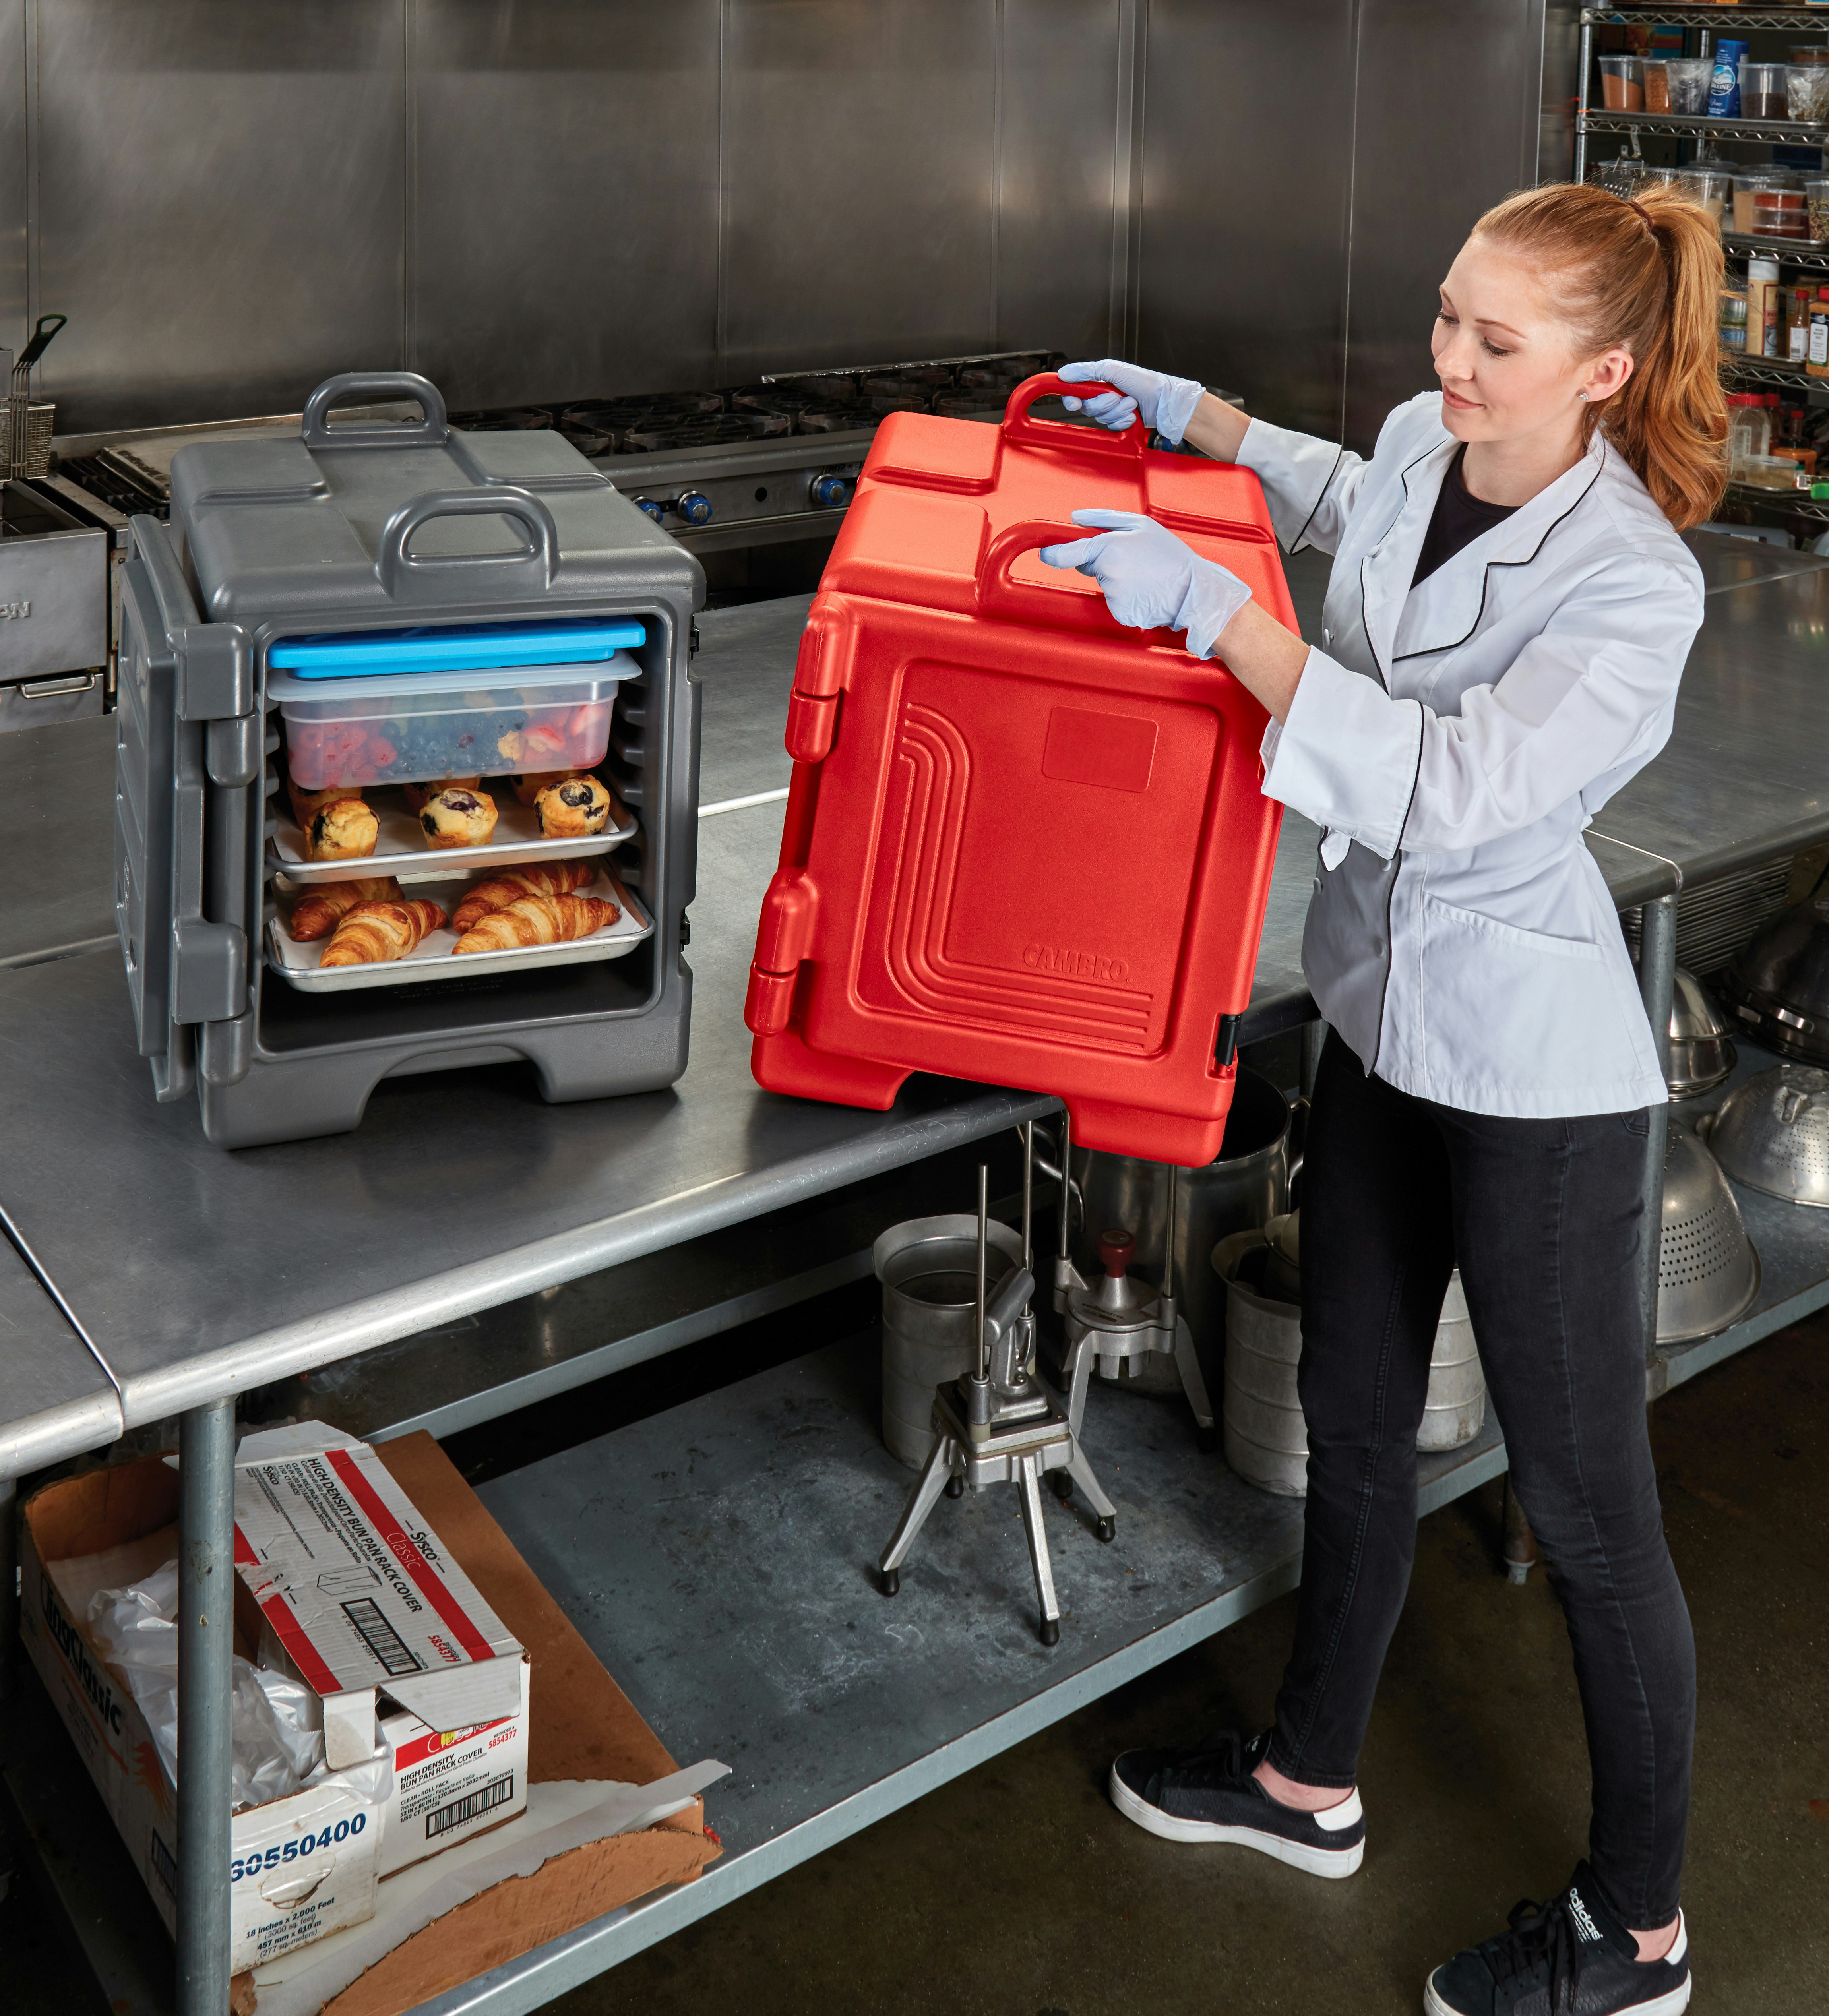 https://cambro-dam.imgix.net/PU0DO3EZ/as/pgtib3-d75wi0-5qfmat/1318CC158_Hot_Red_Front_Loading_Combo_Carrier_w_Pans.jpg?dl